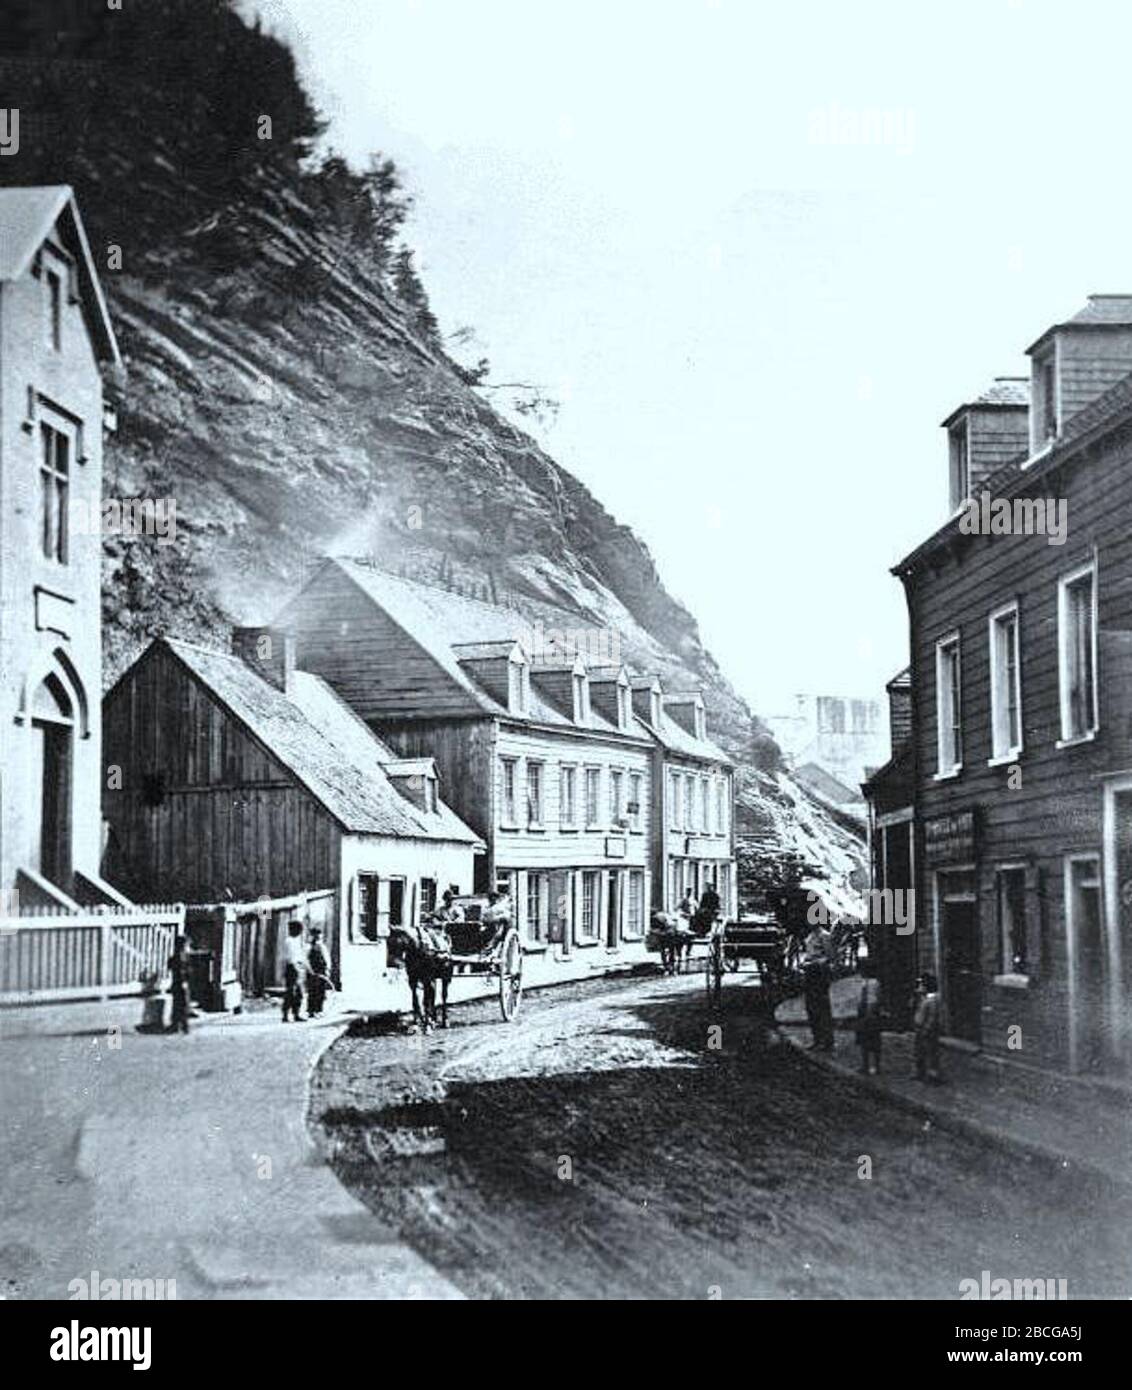 'English: Photograph, Champlain Street below the Citadel, Quebec City, QC, 1865, William Notman (1826-1891), Silver salts on paper mounted on paper - Albumen process - 10 x 8 cm Français : Photographie, La rue Champlain, en bas de la Citadelle, Québec, QC, 1865, William Notman (1826-1891), Sels d'argent sur papier monté sur papier - Papier albuminé - 10 x 8 cm; 1865; This image is available from the McCord Museum under the access number I-17502.1  This tag does not indicate the copyright status of the attached work. A normal copyright tag is still required. See Commons:Licensing for more infor Stock Photo